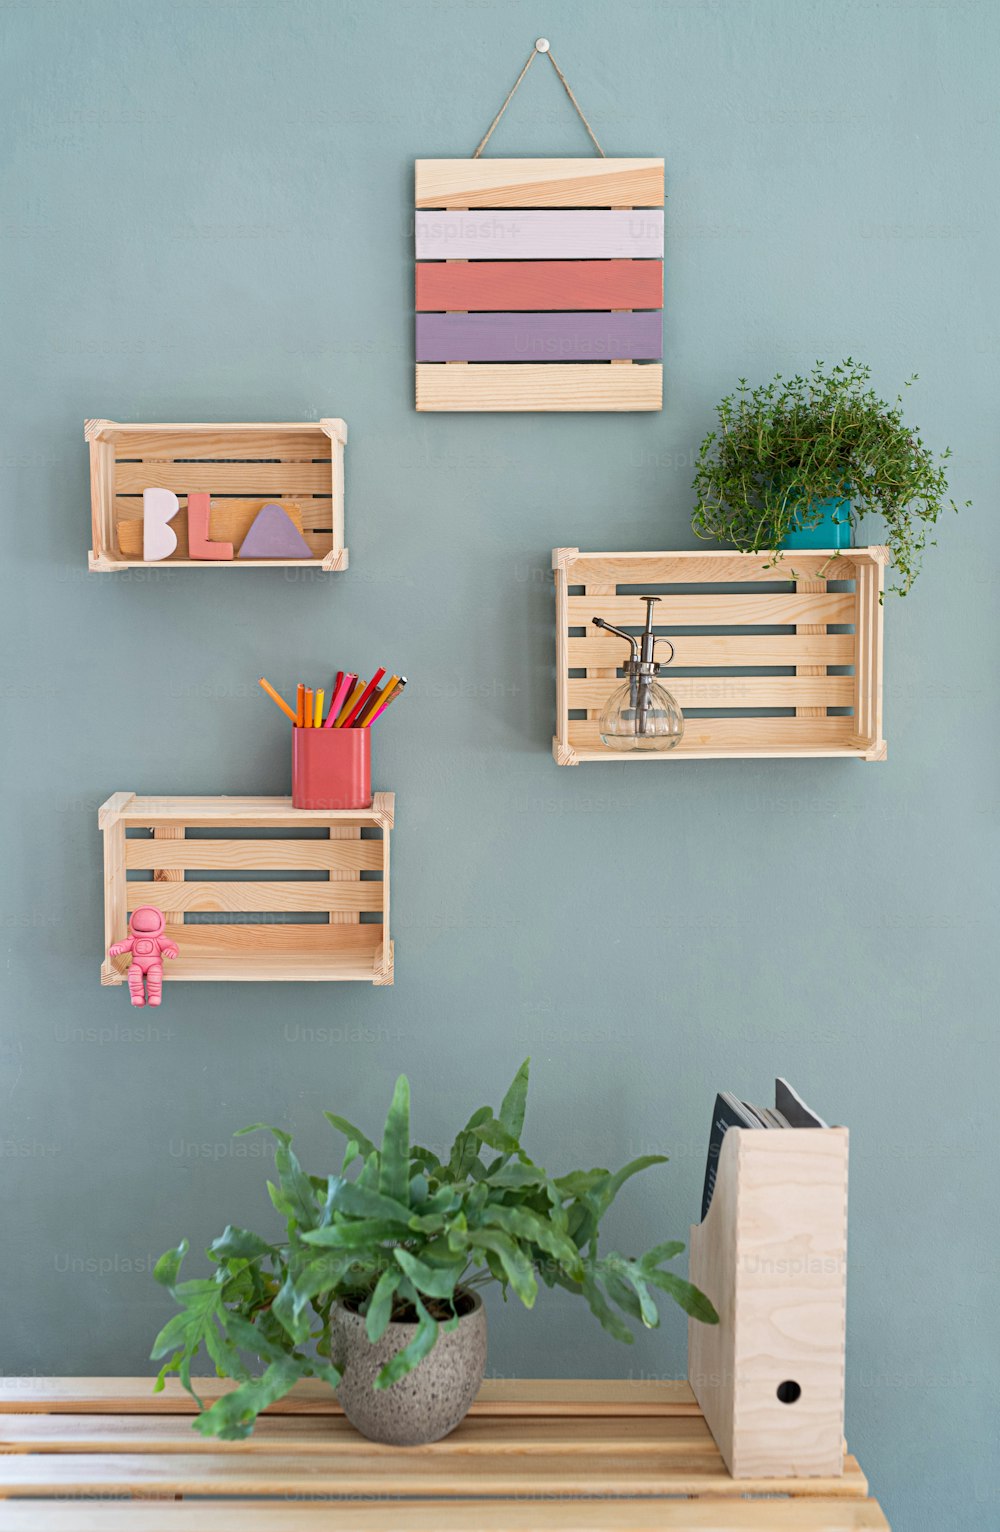 Wooden box shelves with decorations on the wall, a natural decor concept.